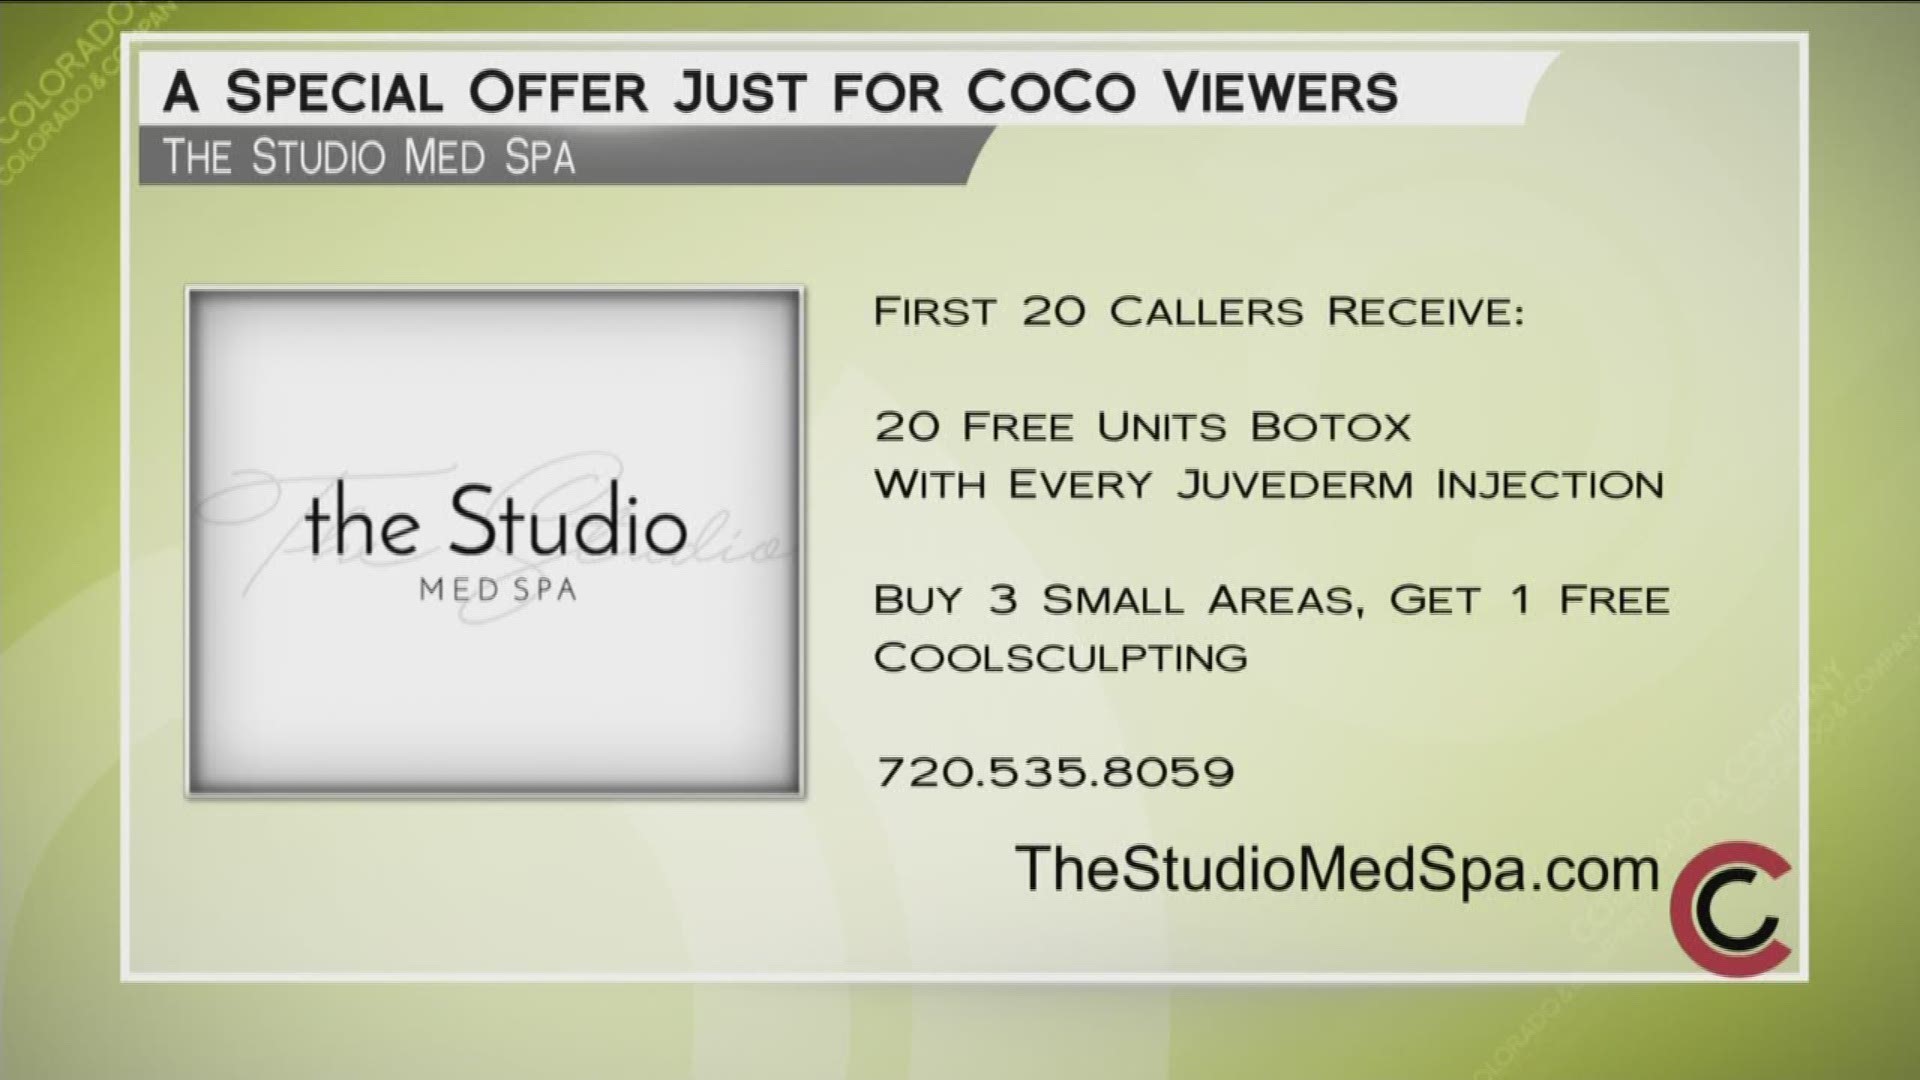 The Studio Med Spa has the best spa experience and aesthetic beauty services in Colorado. The first 20 callers to 720.535.8059 can get 20 units of Botox with every Juvederm injection. Also, when you buy three small Coolsculpting areas, you get the fourth for free! Learn more at www.TheStudioMedSpa.com. 
THIS INTERVIEW HAS COMMERCIAL CONTENT. PRODUCTS AND SERVICES FEATURED APPEAR AS PAID ADVERTISING.